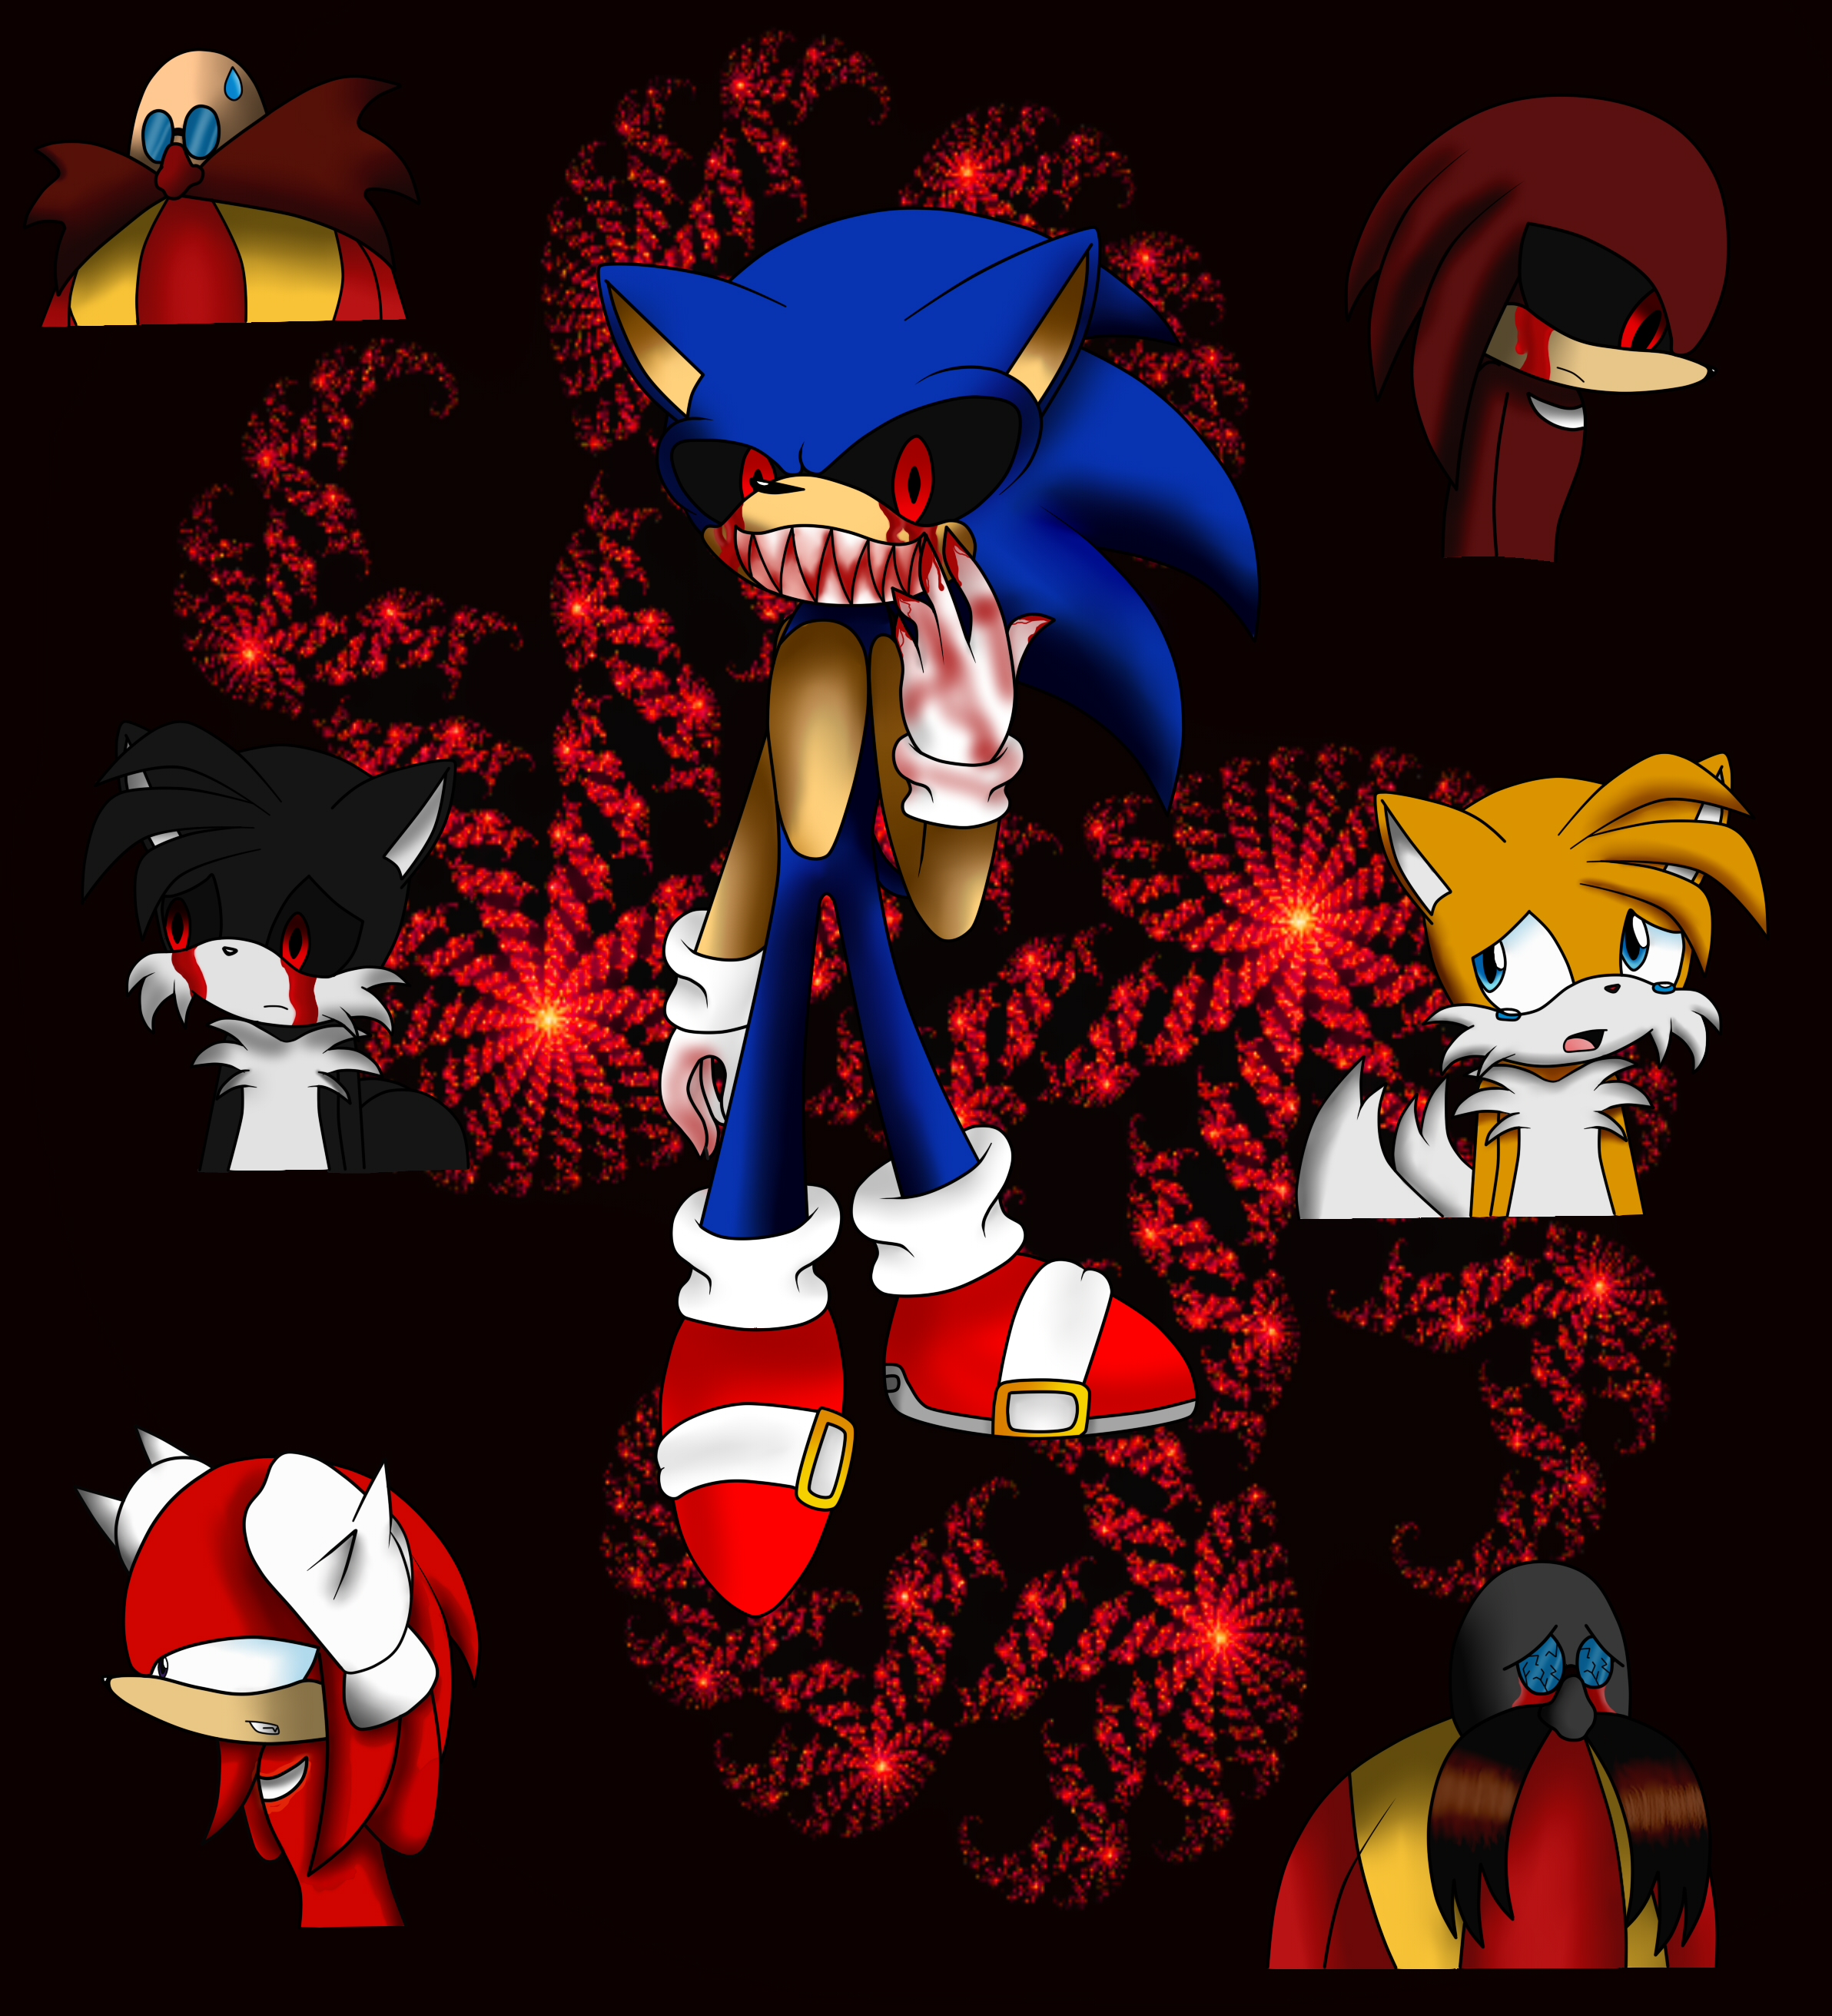 Sonicexeluv Image Sonic Exe HD Wallpaper And